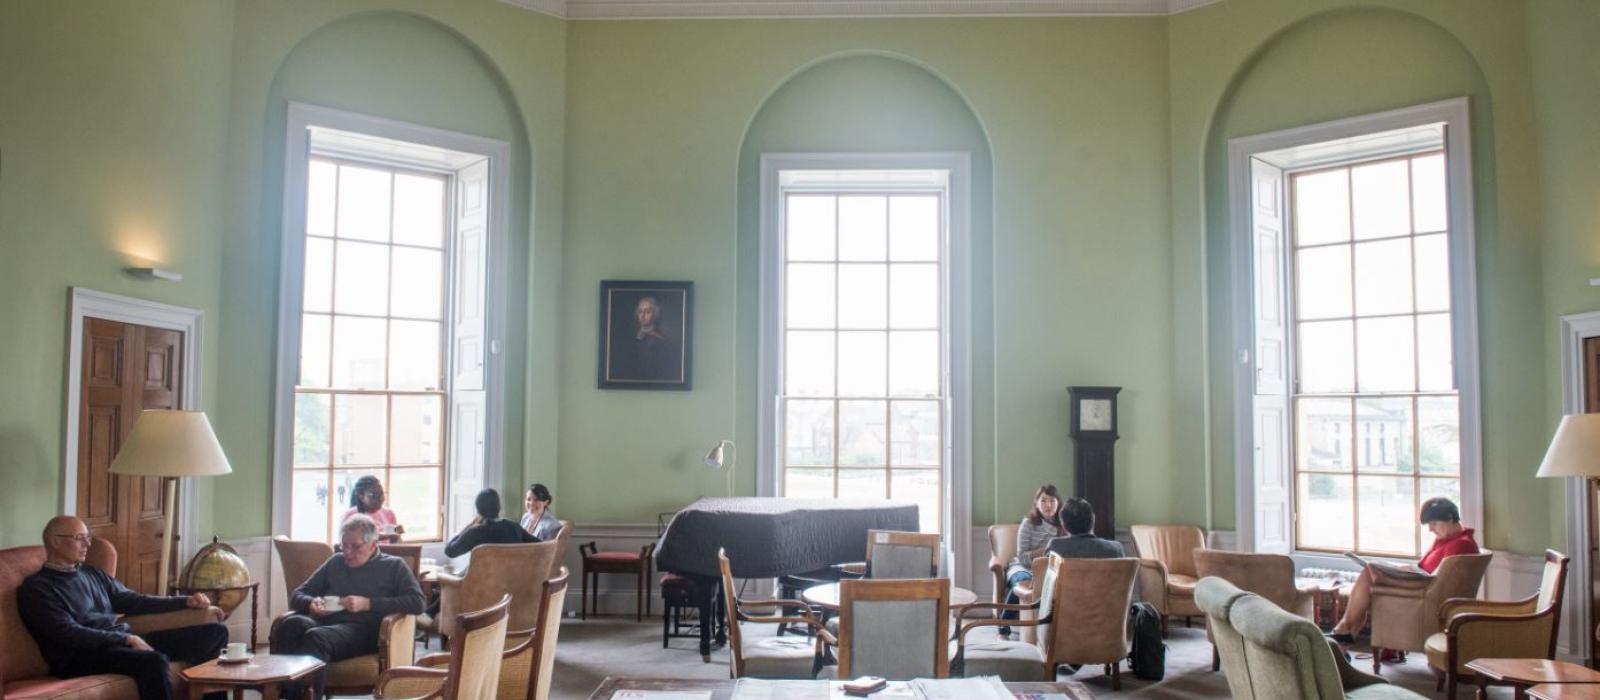 Radcliffe Observatory Common Room, Green Templeton College